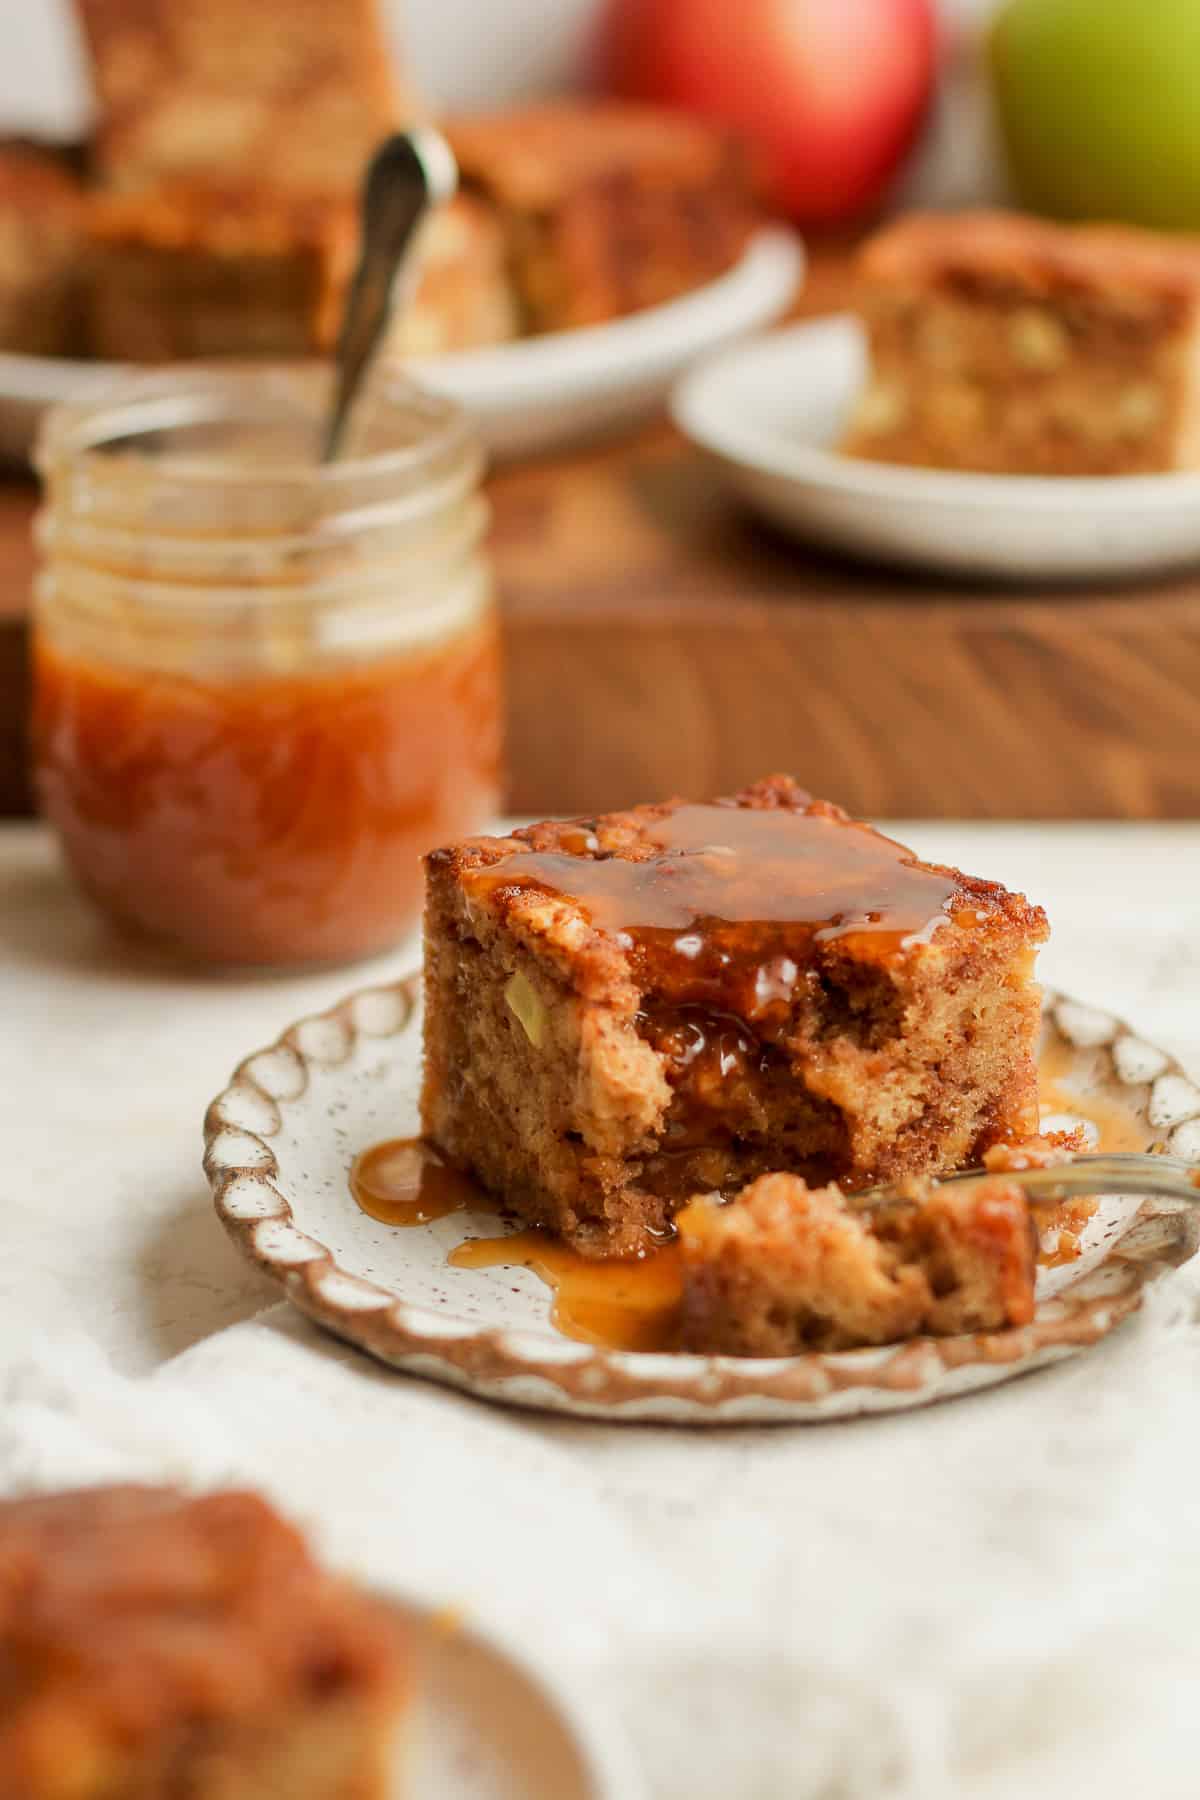 Side view of a slice of applesauce cake with caramel sauce, and a jar of caramel in the background.